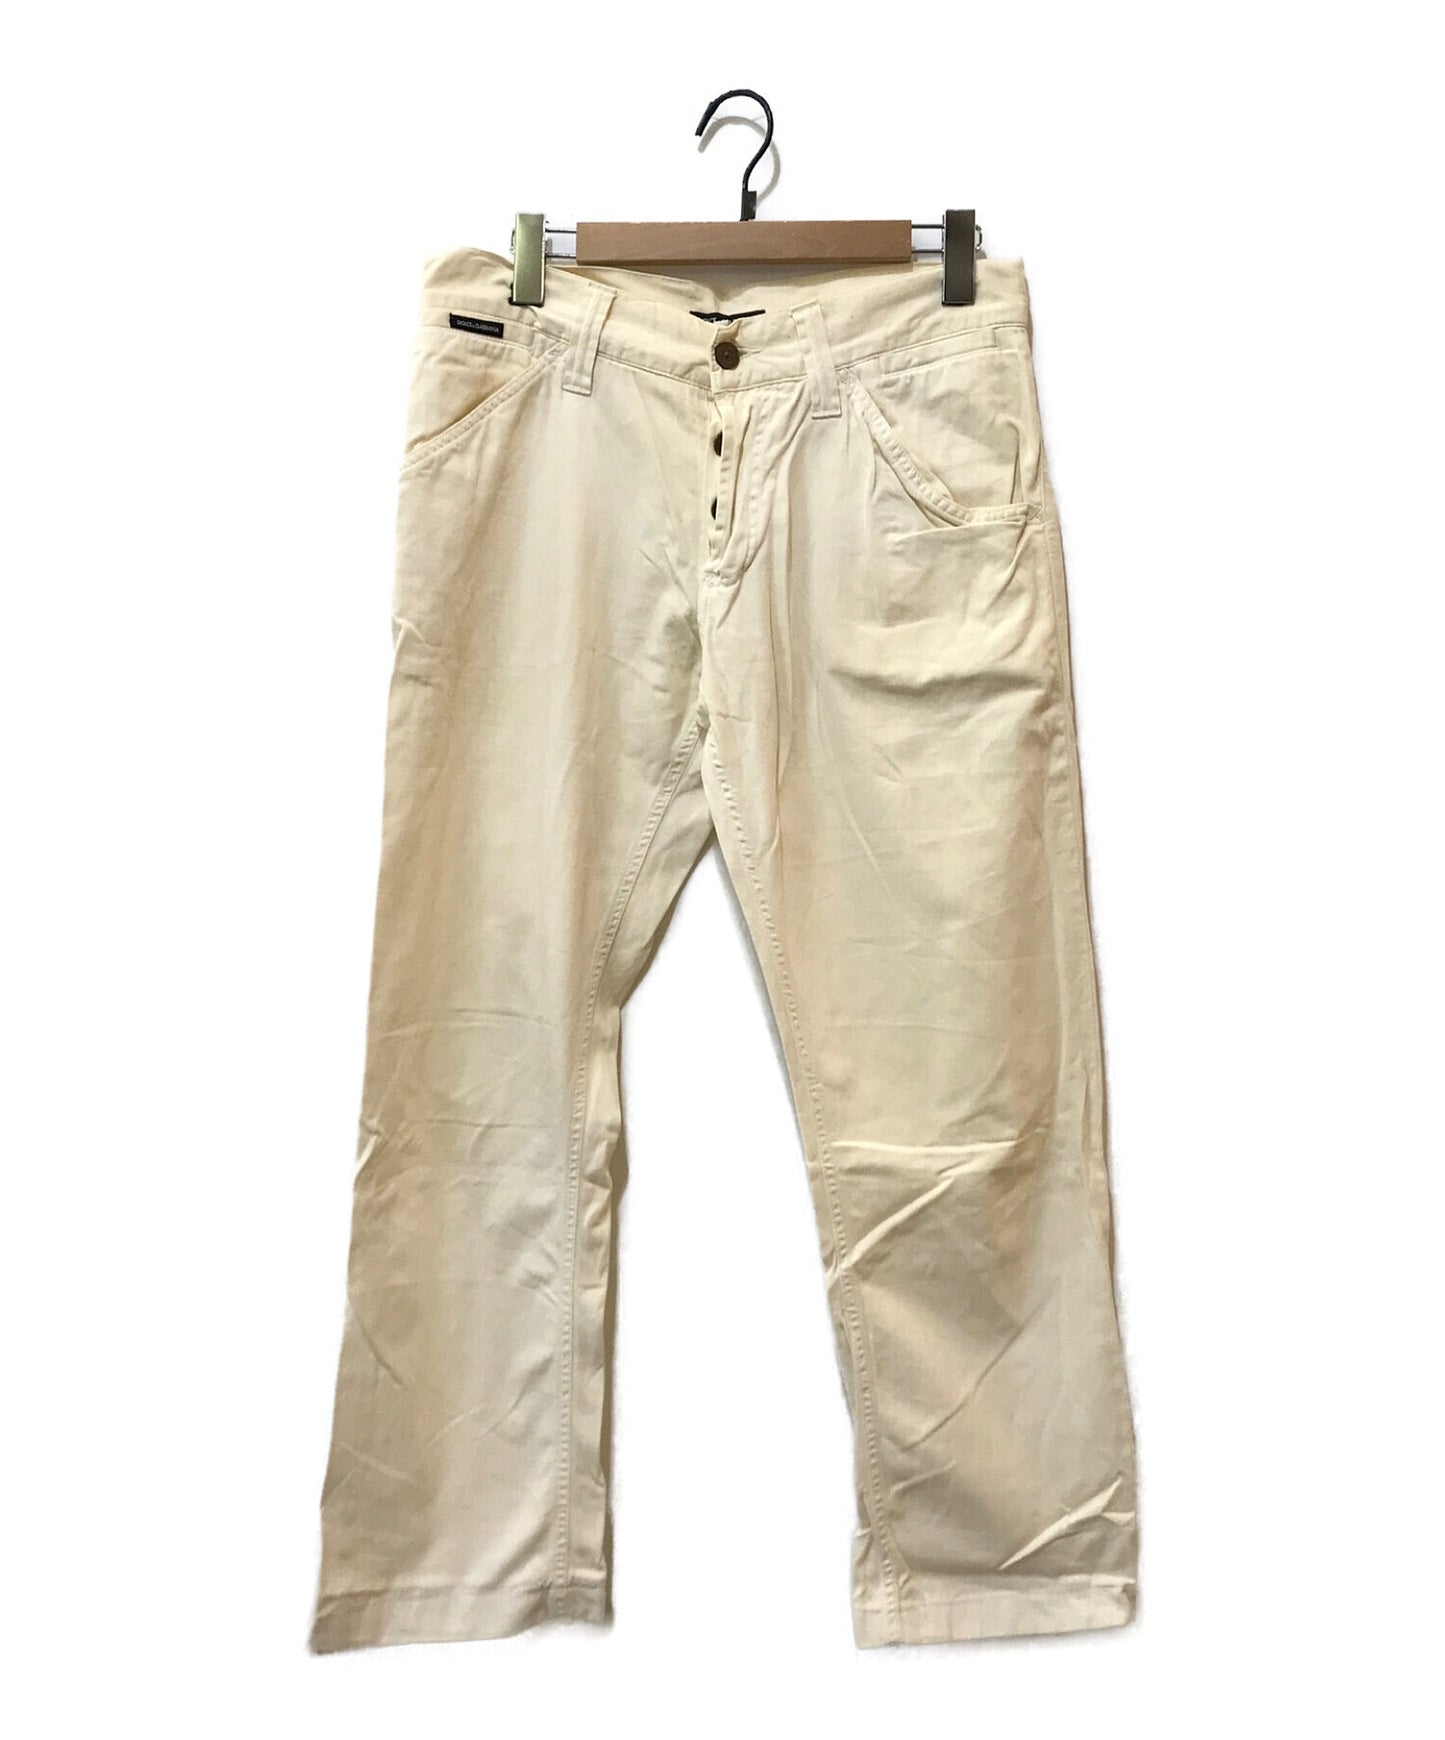 [Pre-owned] DOLCE & GABBANA cotton pants